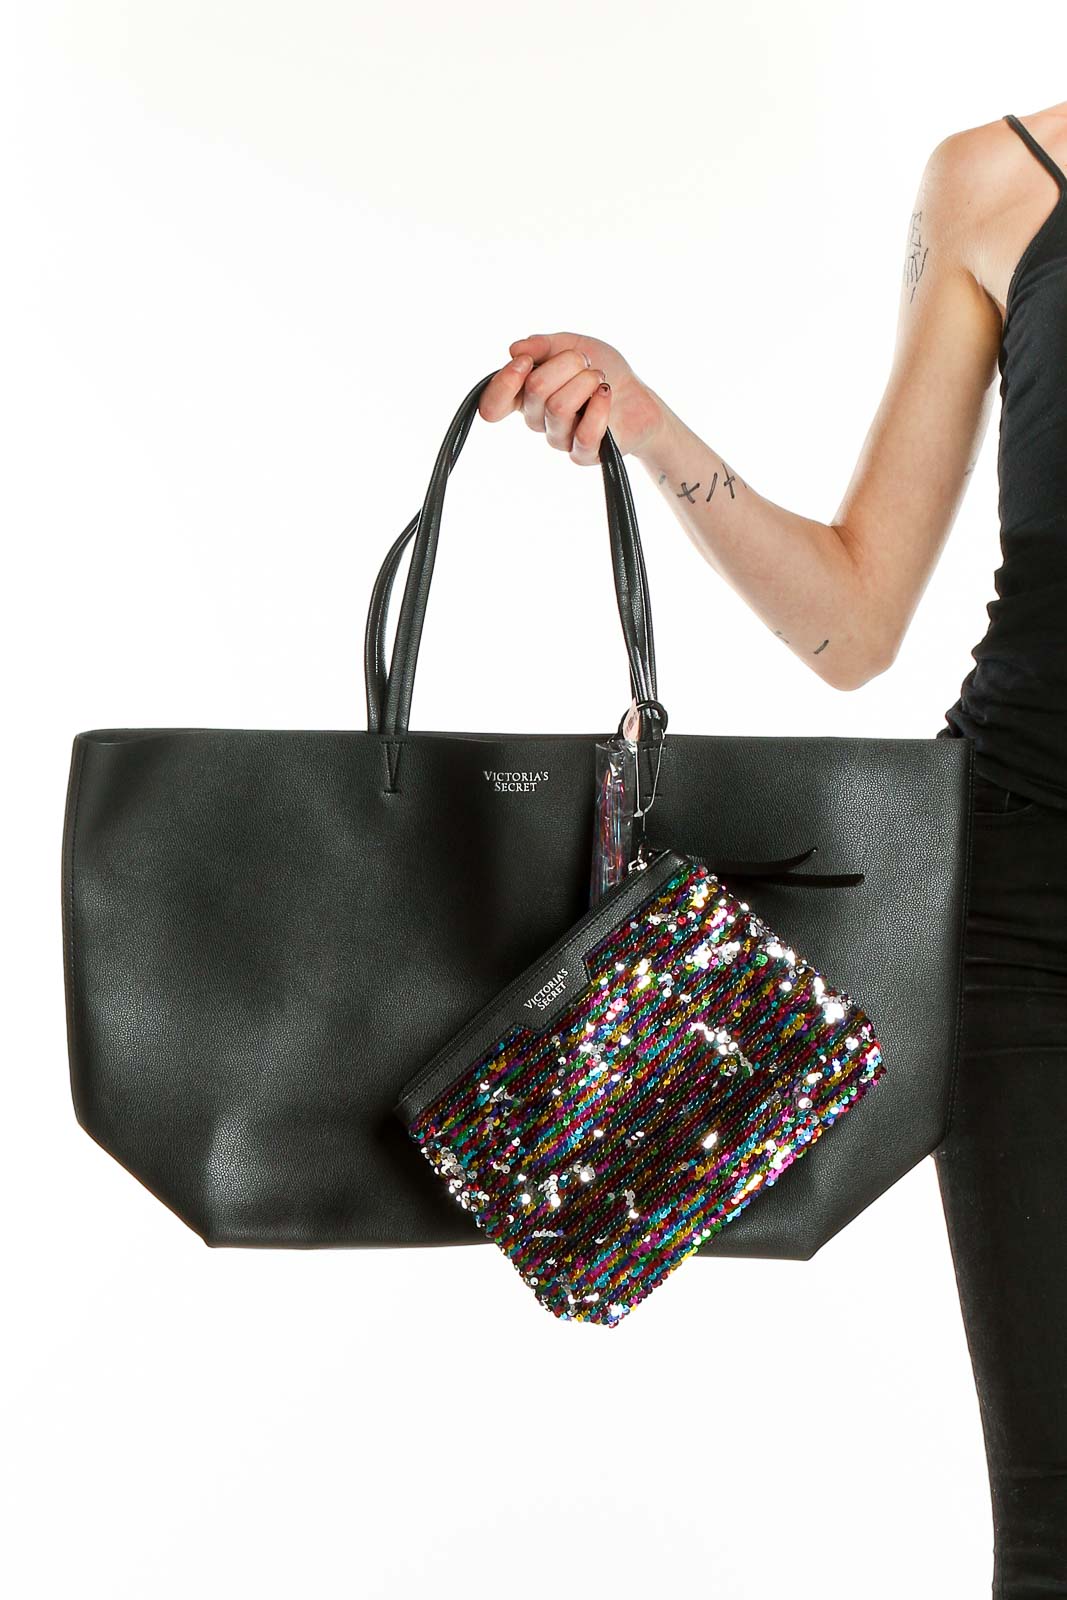 Black Tote With Clutch Bag Front